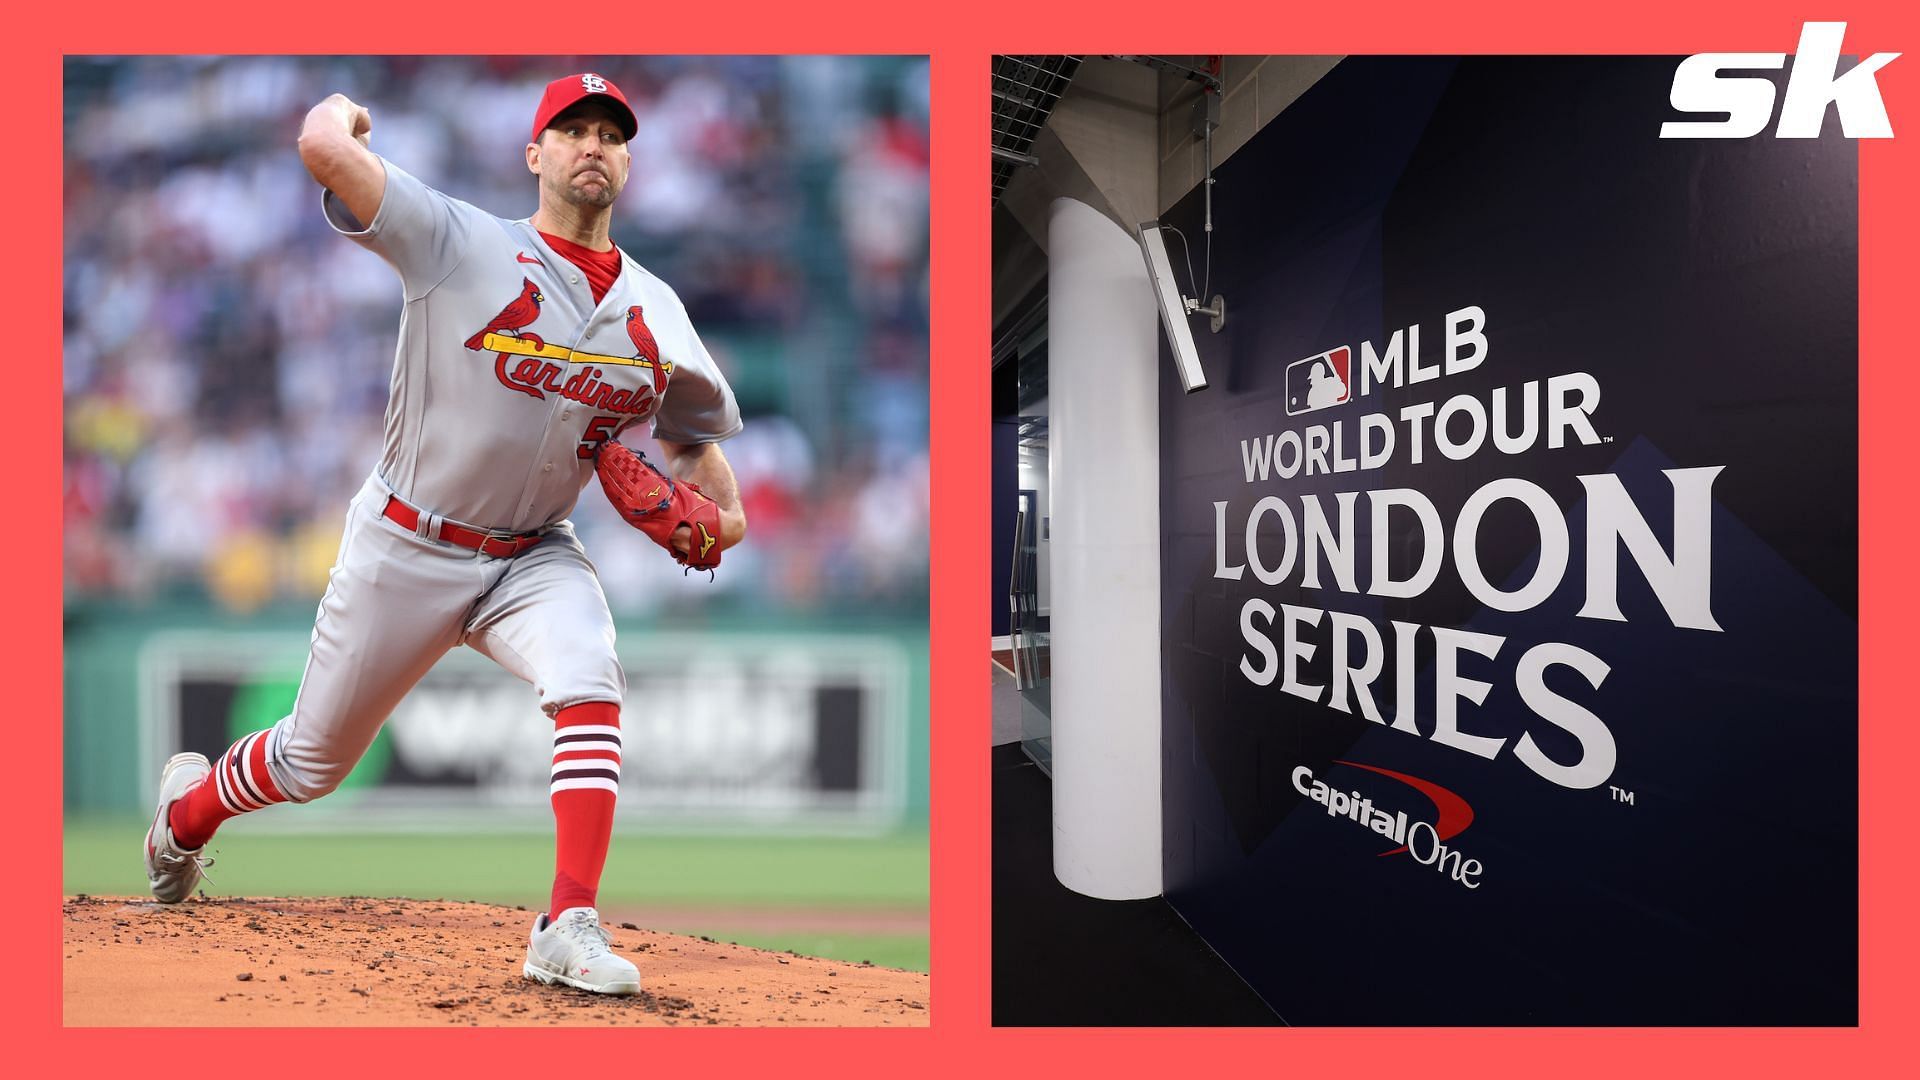 Former MLBer Adam Wainwright joining Fox broadcast for playoffs